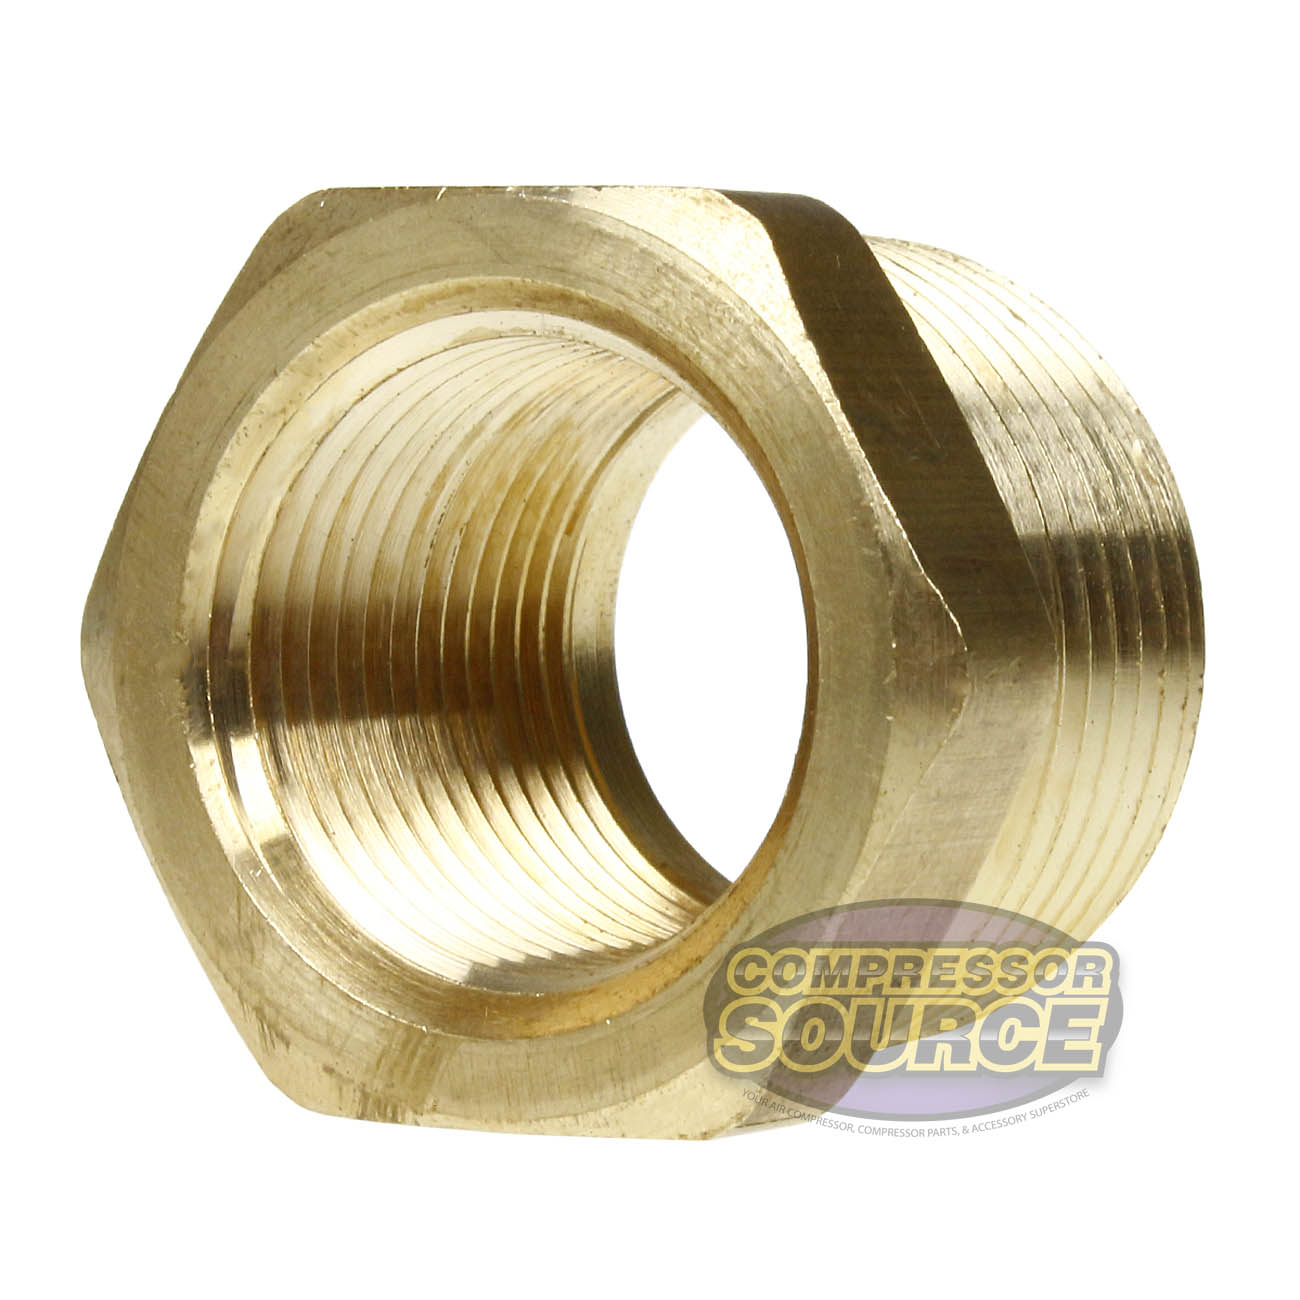 2 Pack 1" x 3/4" Male NPTF x Female NPTF Hex Bushing Reducer Solid Brass Fitting